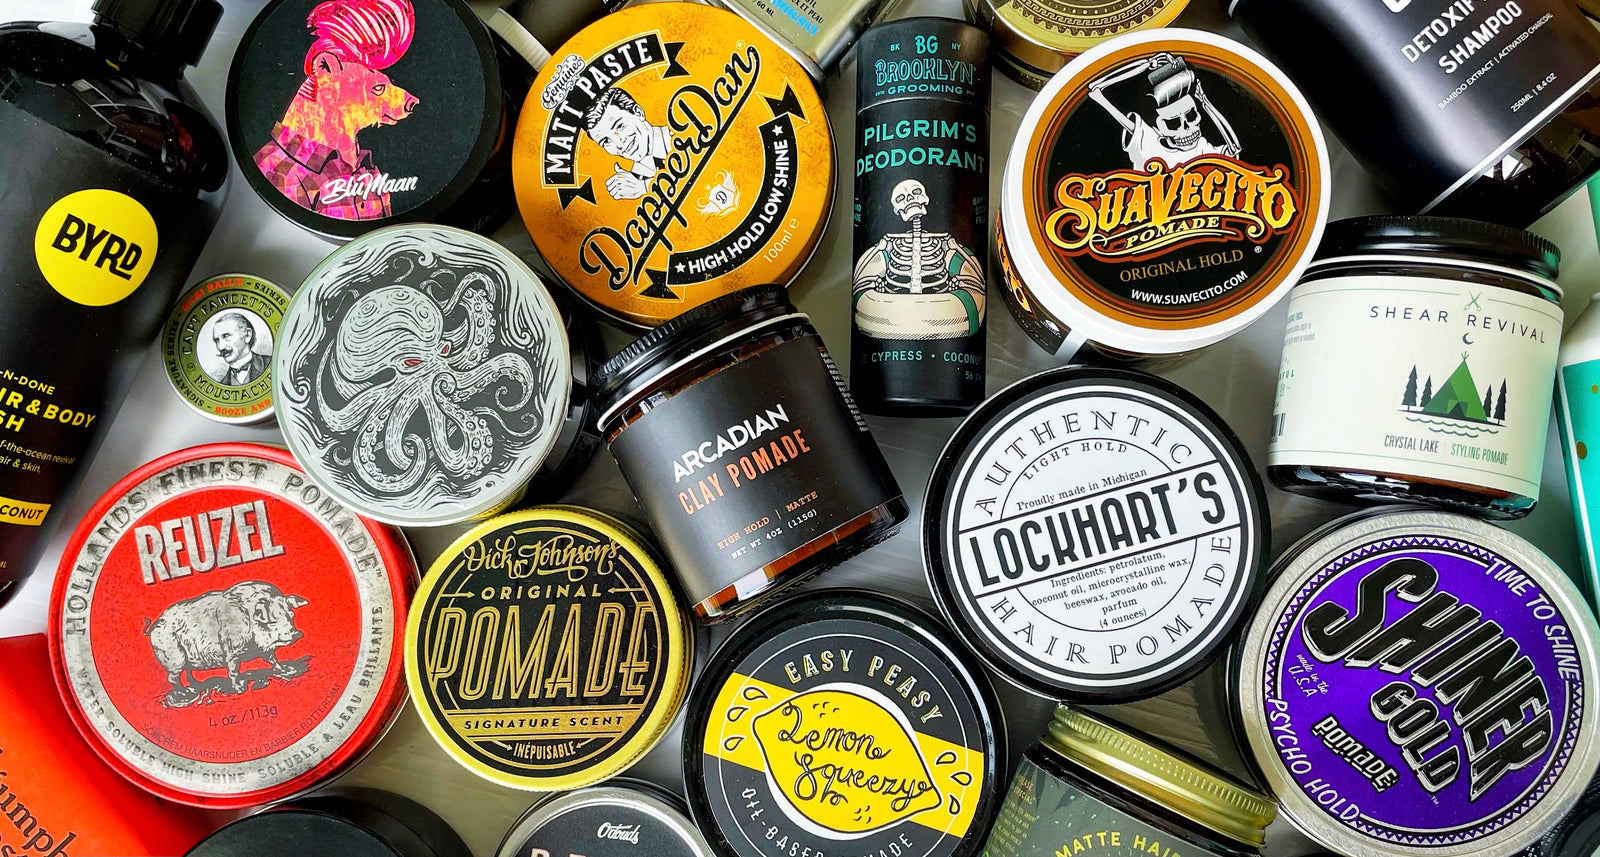 Men's Grooming & Products - Fast Shipping Australia